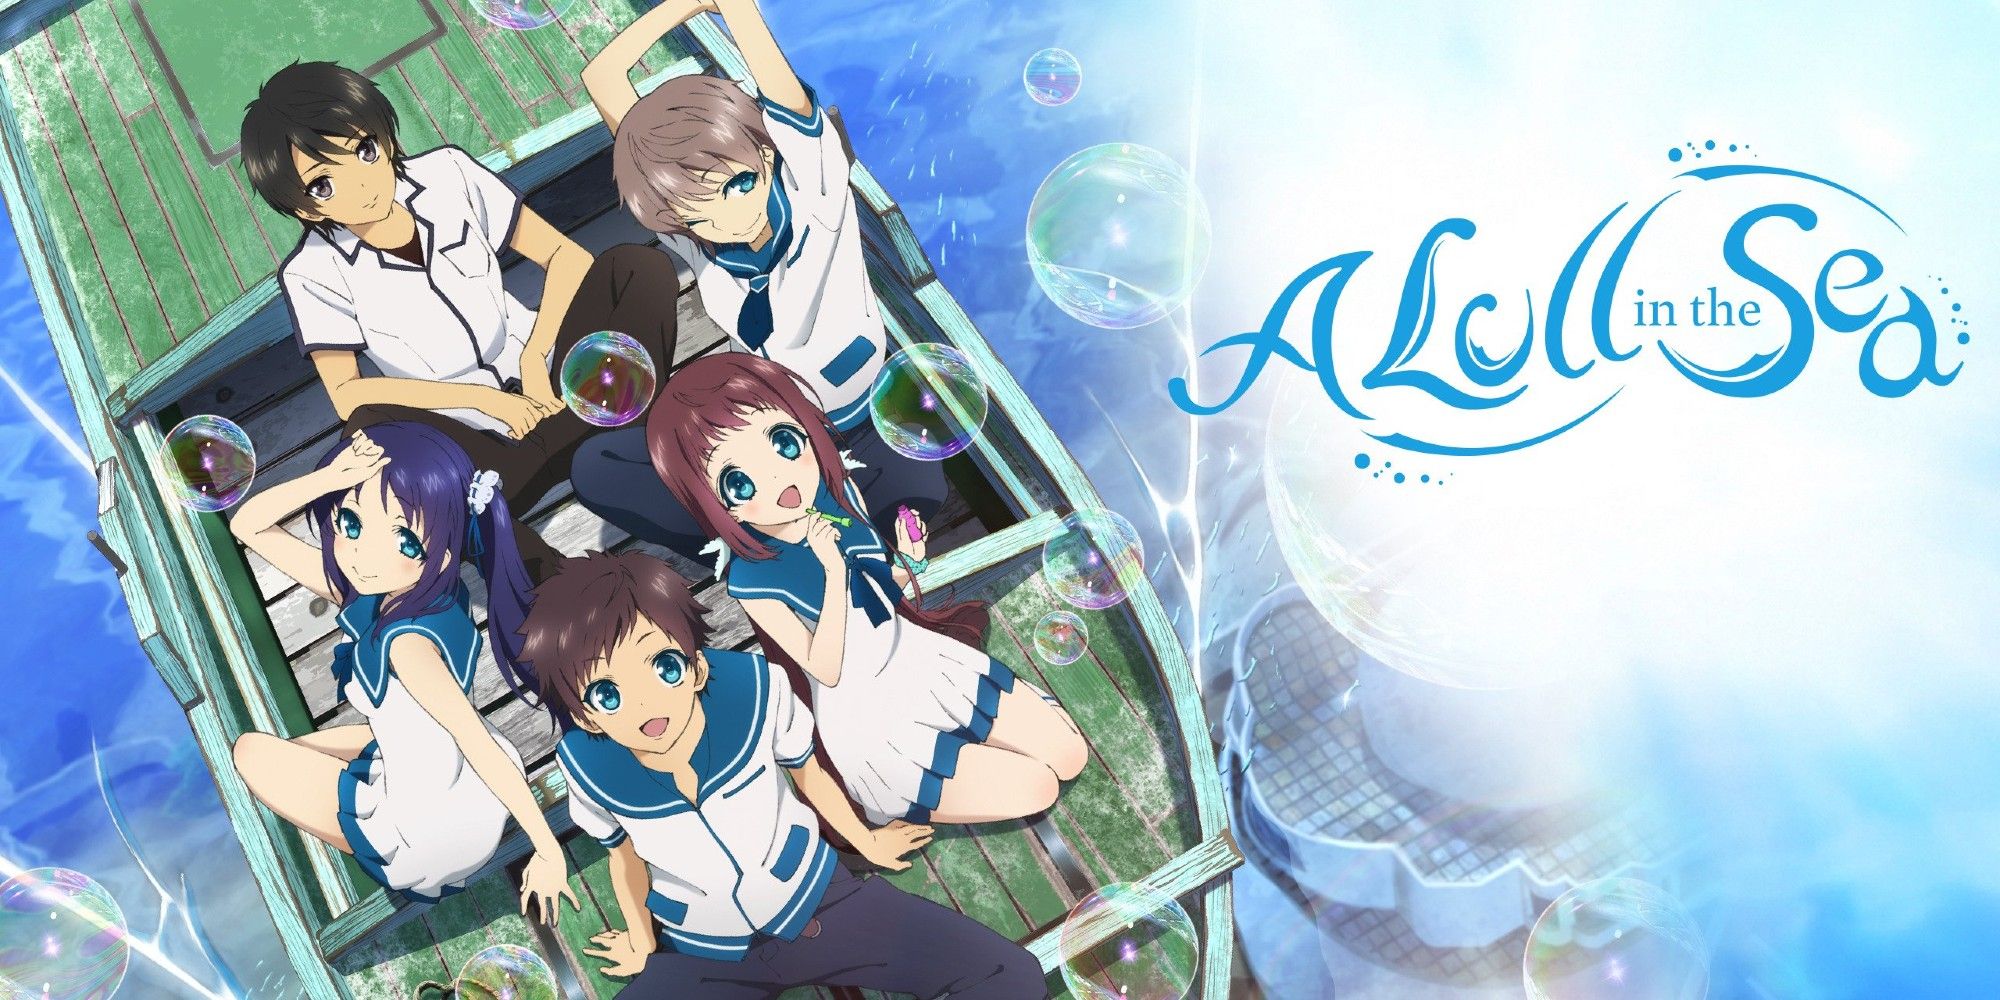 the main characters in the anime A Lull in the Sea